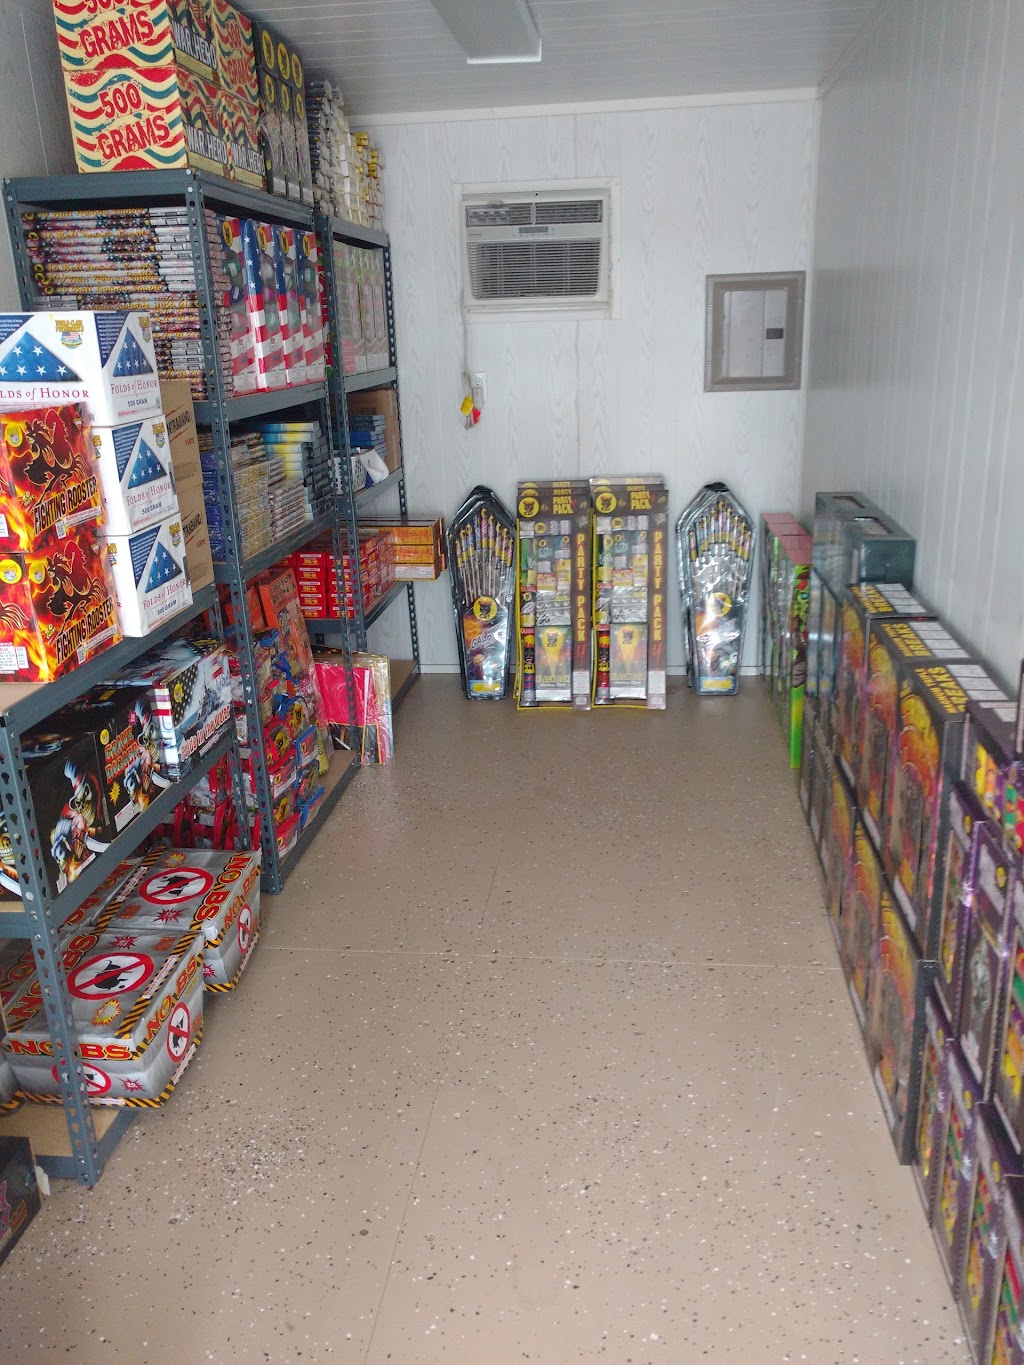 P Willy FIREWORKS #4 | 28000 County Rd 222, Bremen, AL 35033, USA | Phone: (256) 339-1525